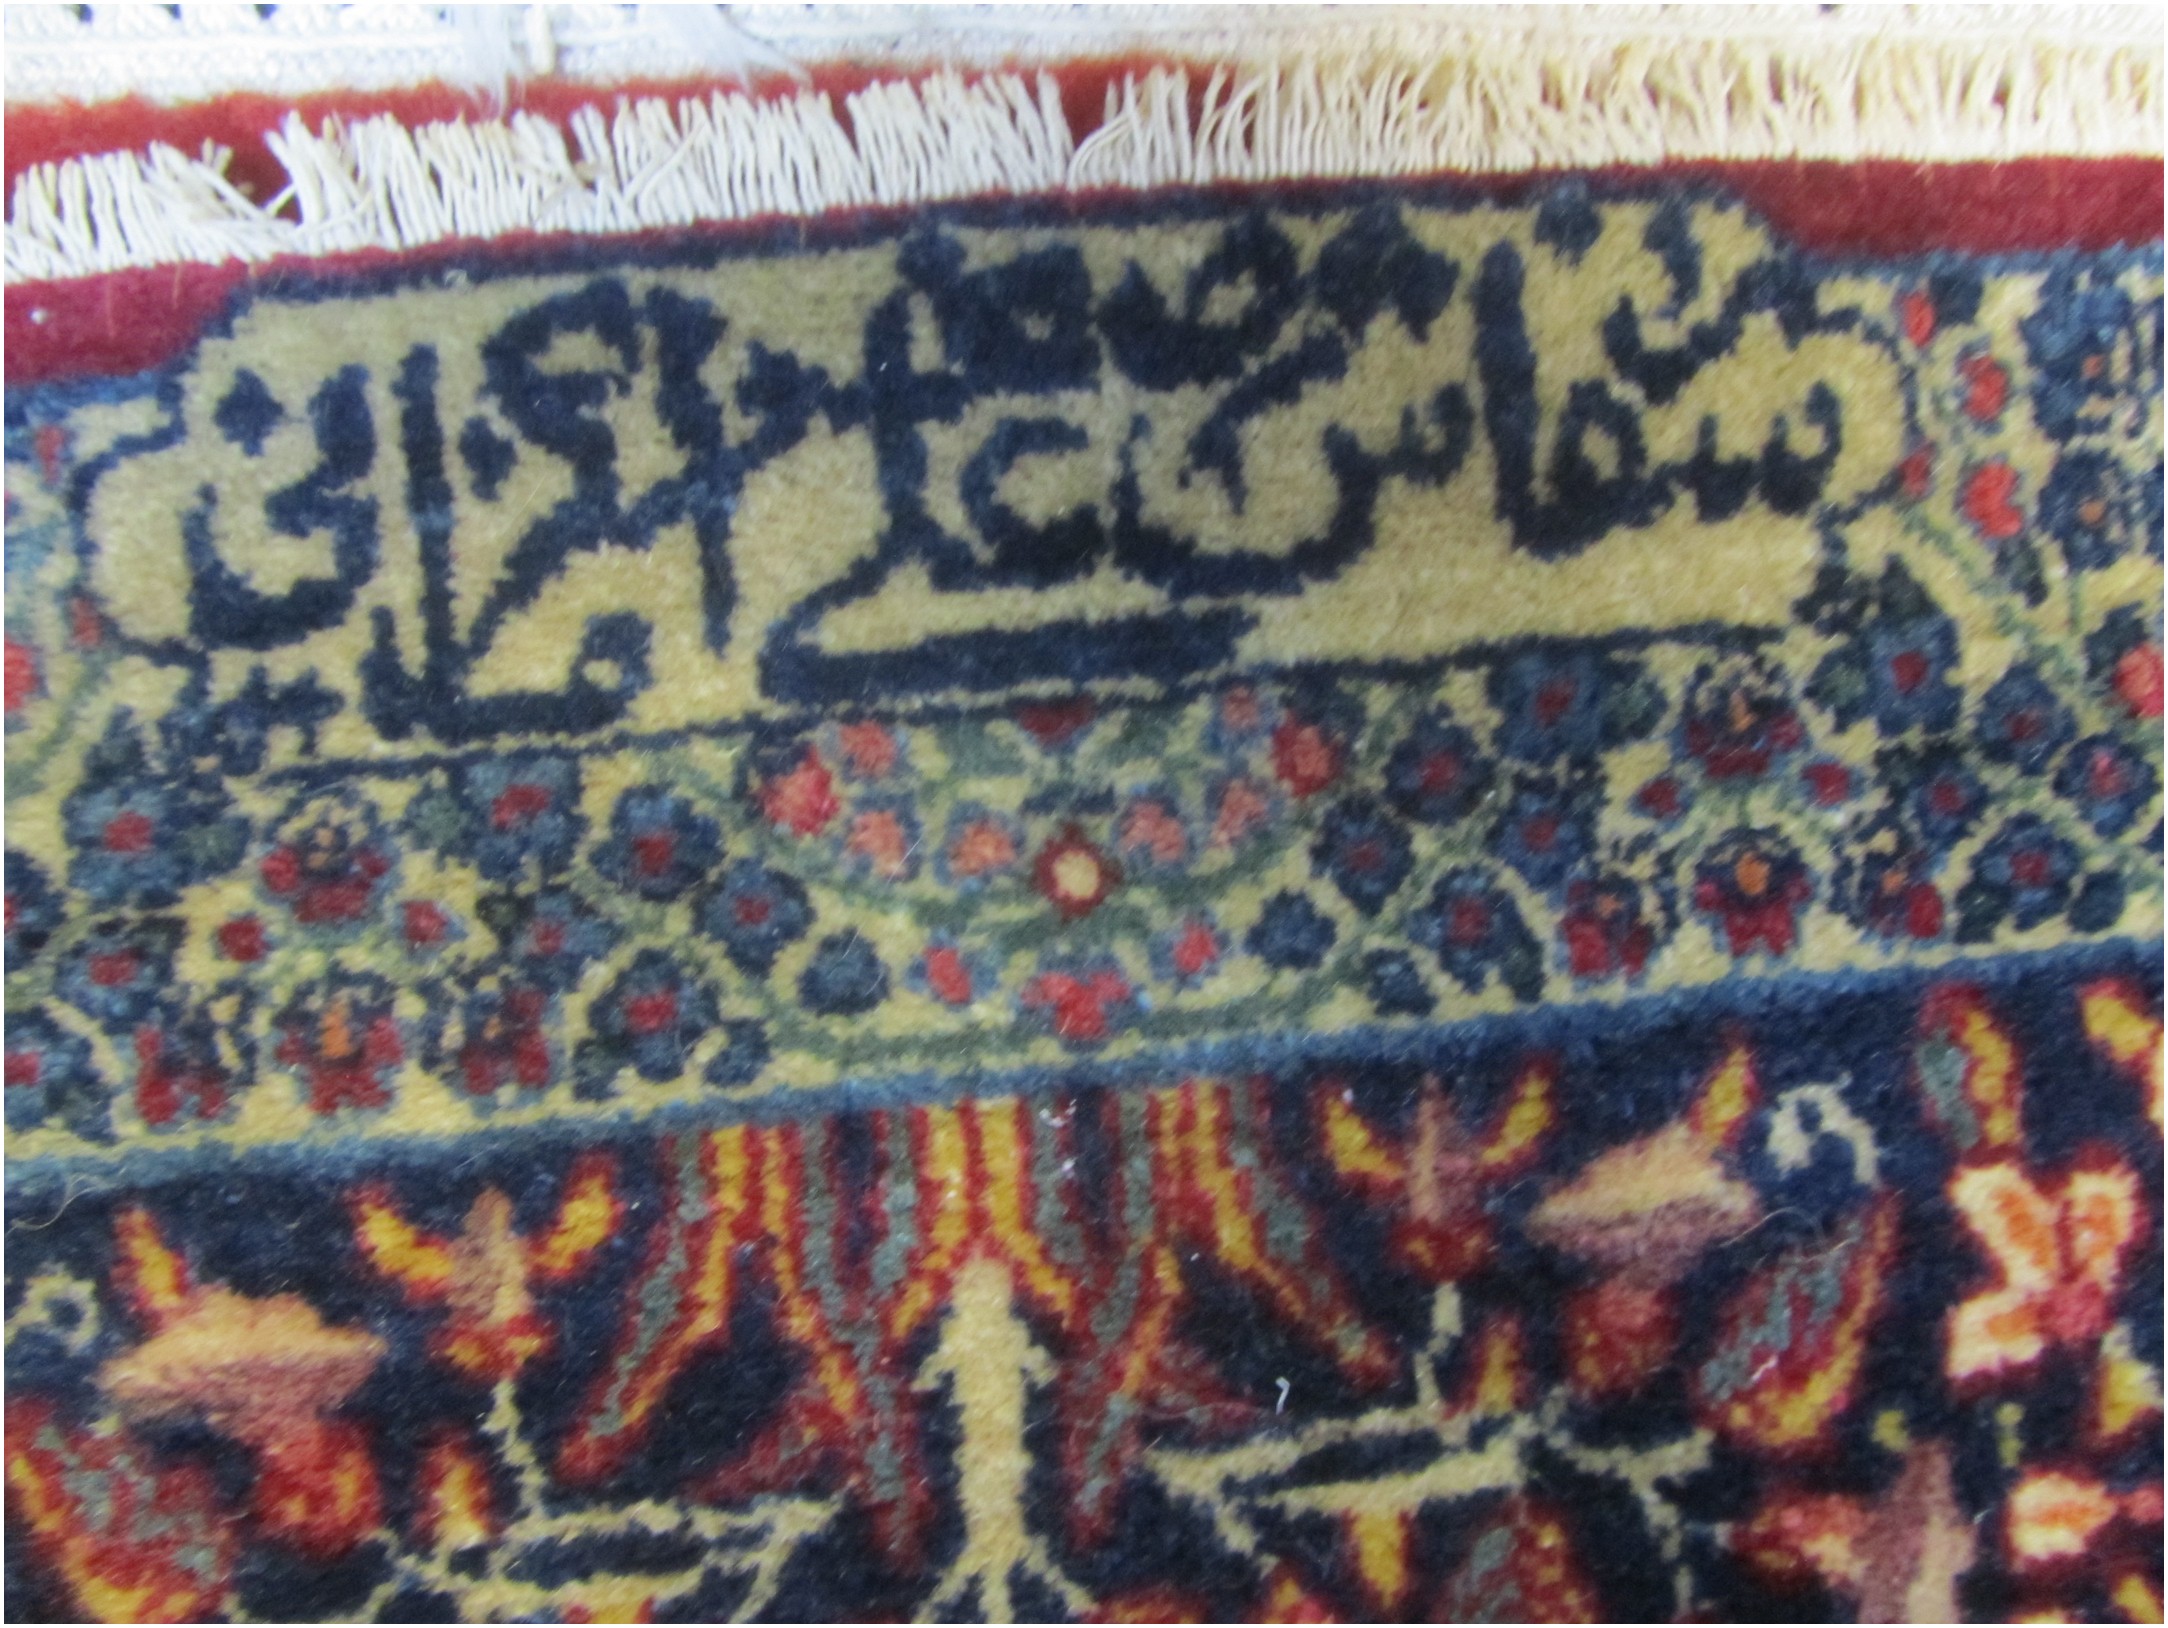 the second signature is transliterated as Sefaresheh Ali Asghar Kermani, meaning Commissioned by Ali Asghar Kermani.